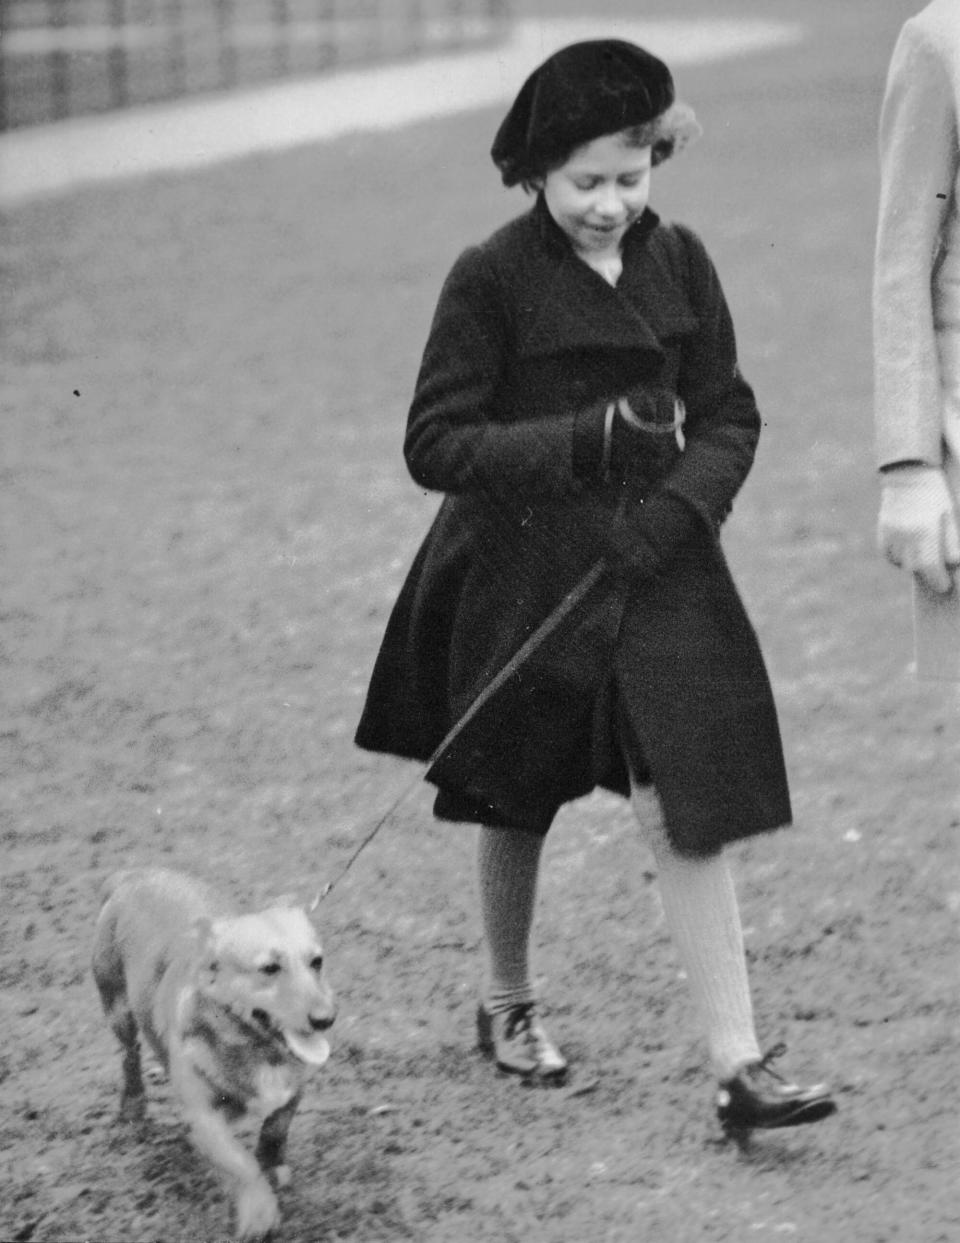 Princess Elizabeth takes her pet dog for a walk in Hyde Park, London, on Feb. 26, 1936. It’s widely known that Elizabeth loved corgi dogs, Princess Diana reportedly called the animals the queen’s “moving carpet” because they accompanied her everywhere. Elizabeth was photographed hugging one of the pooches as far back as 1936, age 10, and was given a corgi named Susan as an 18th birthday present.